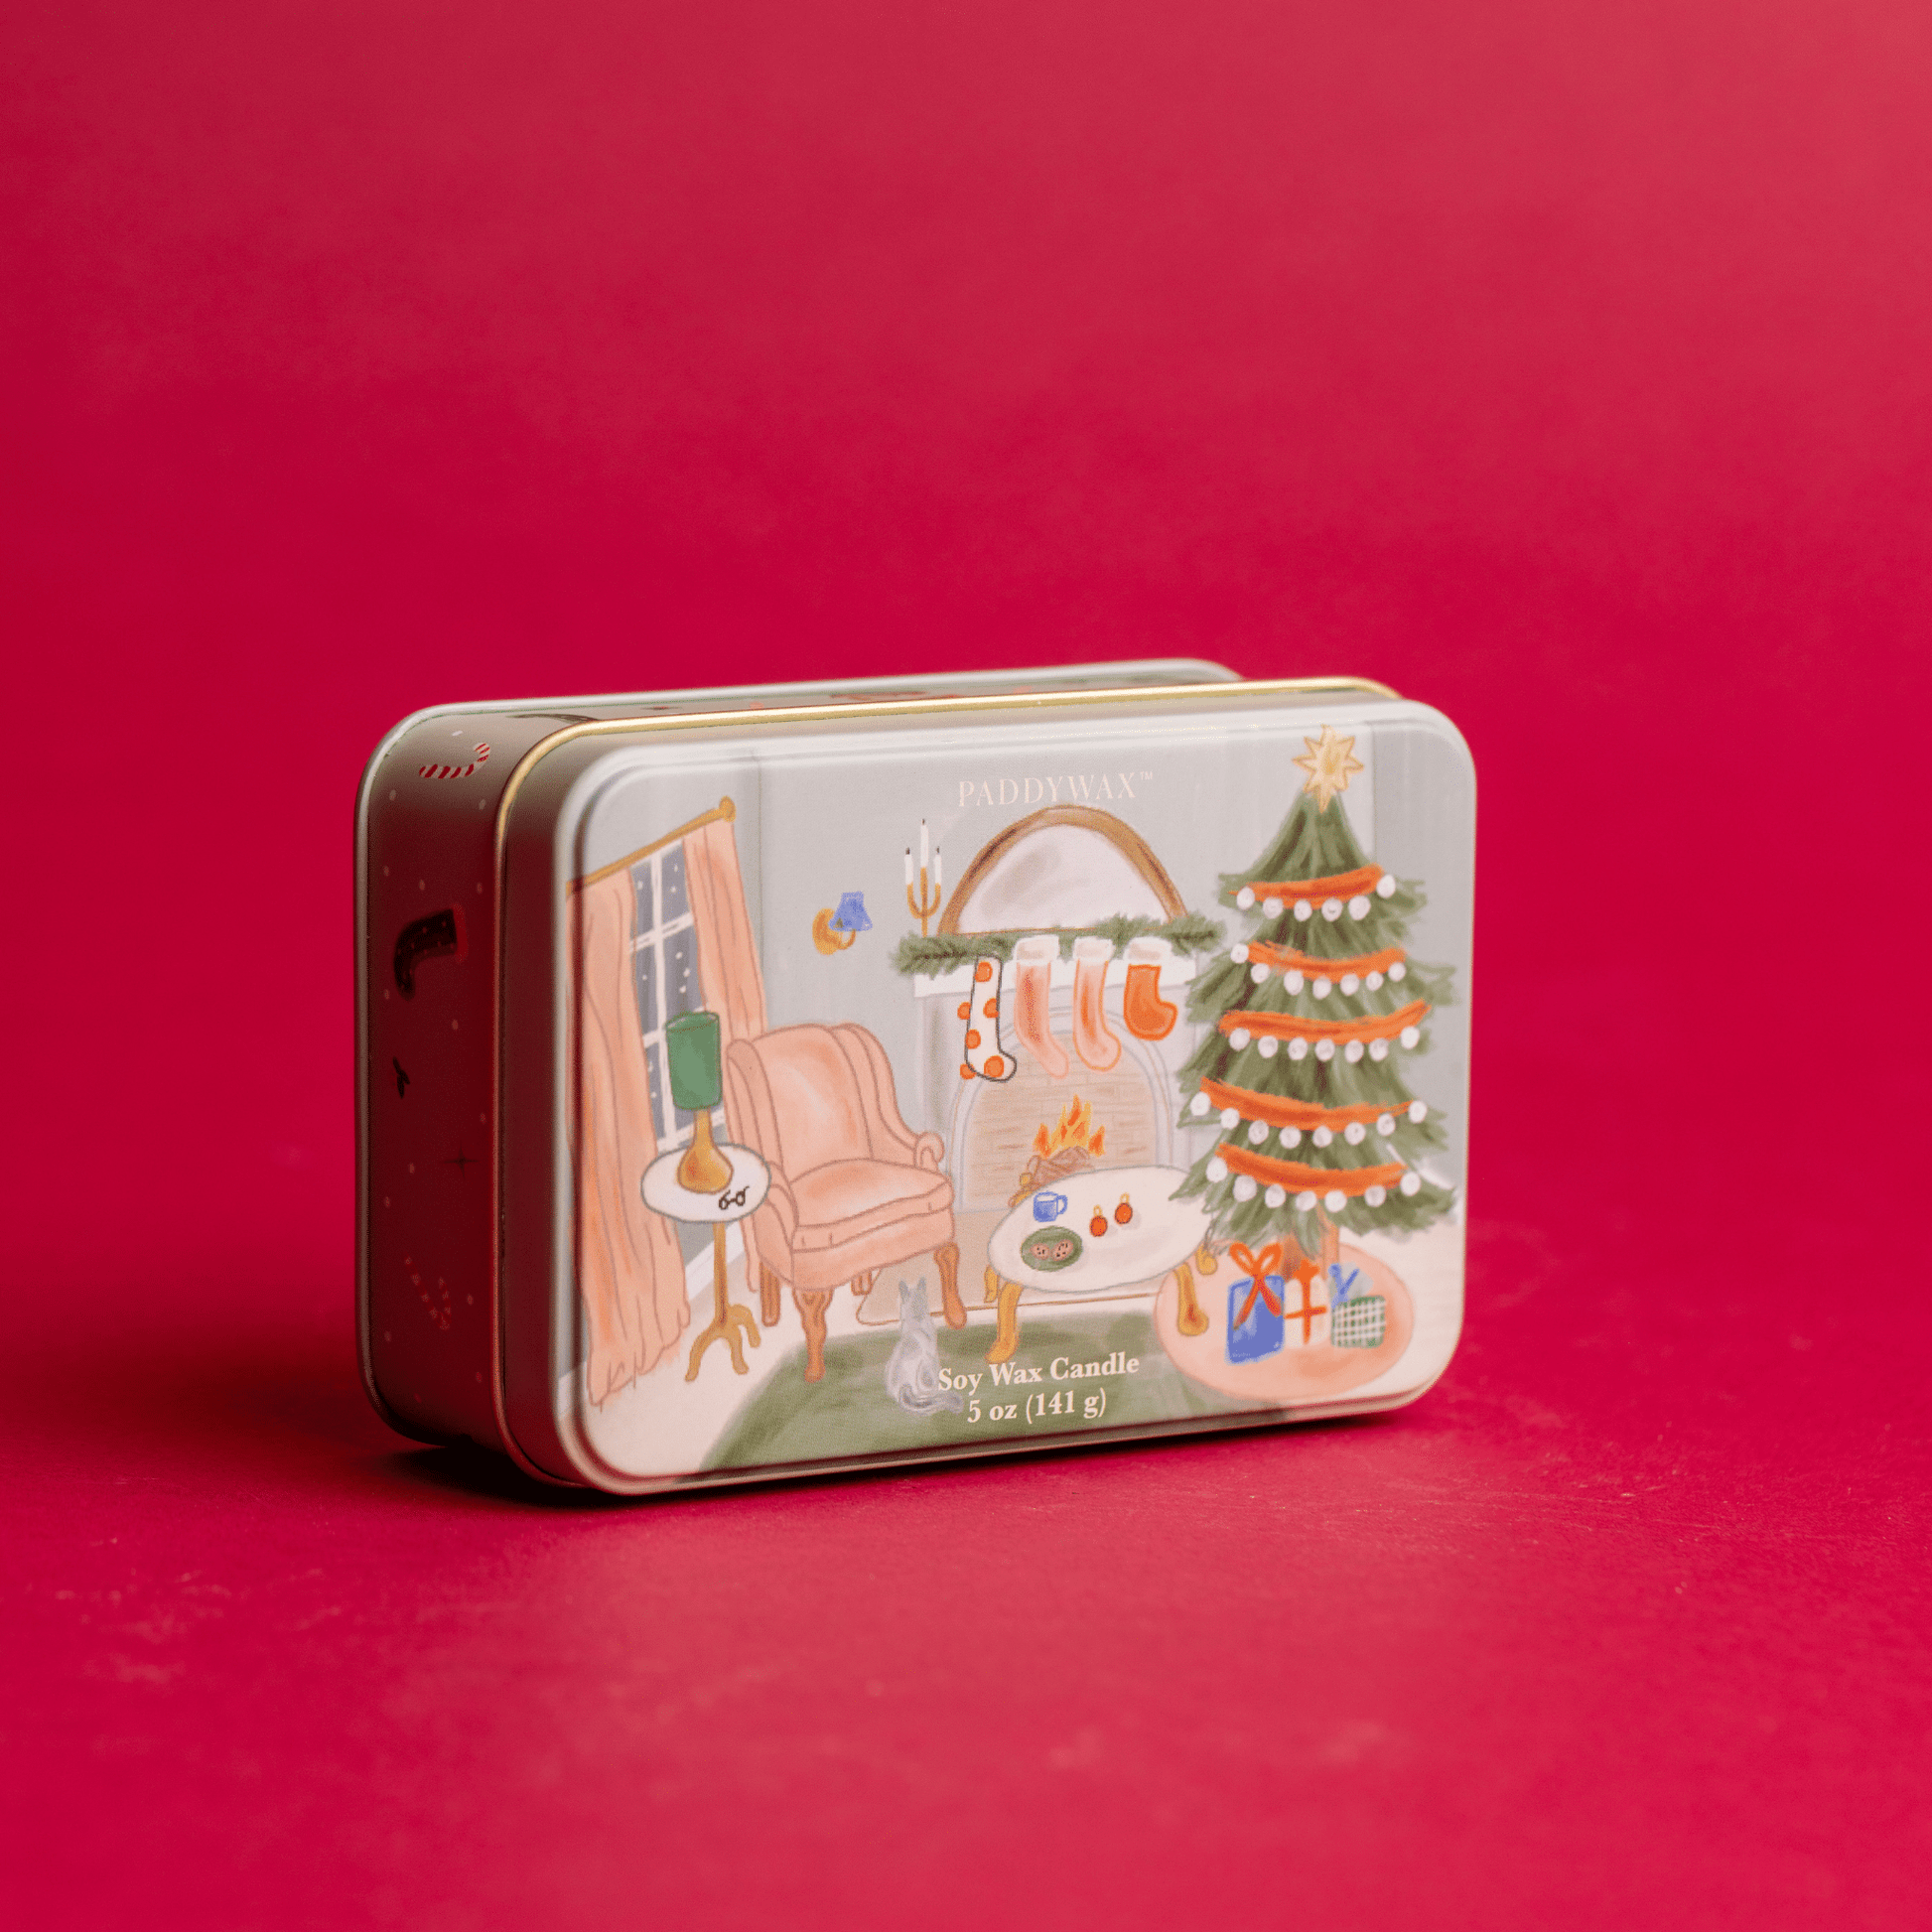 5 oz holiday tin with custom artwork resting on red table and lit